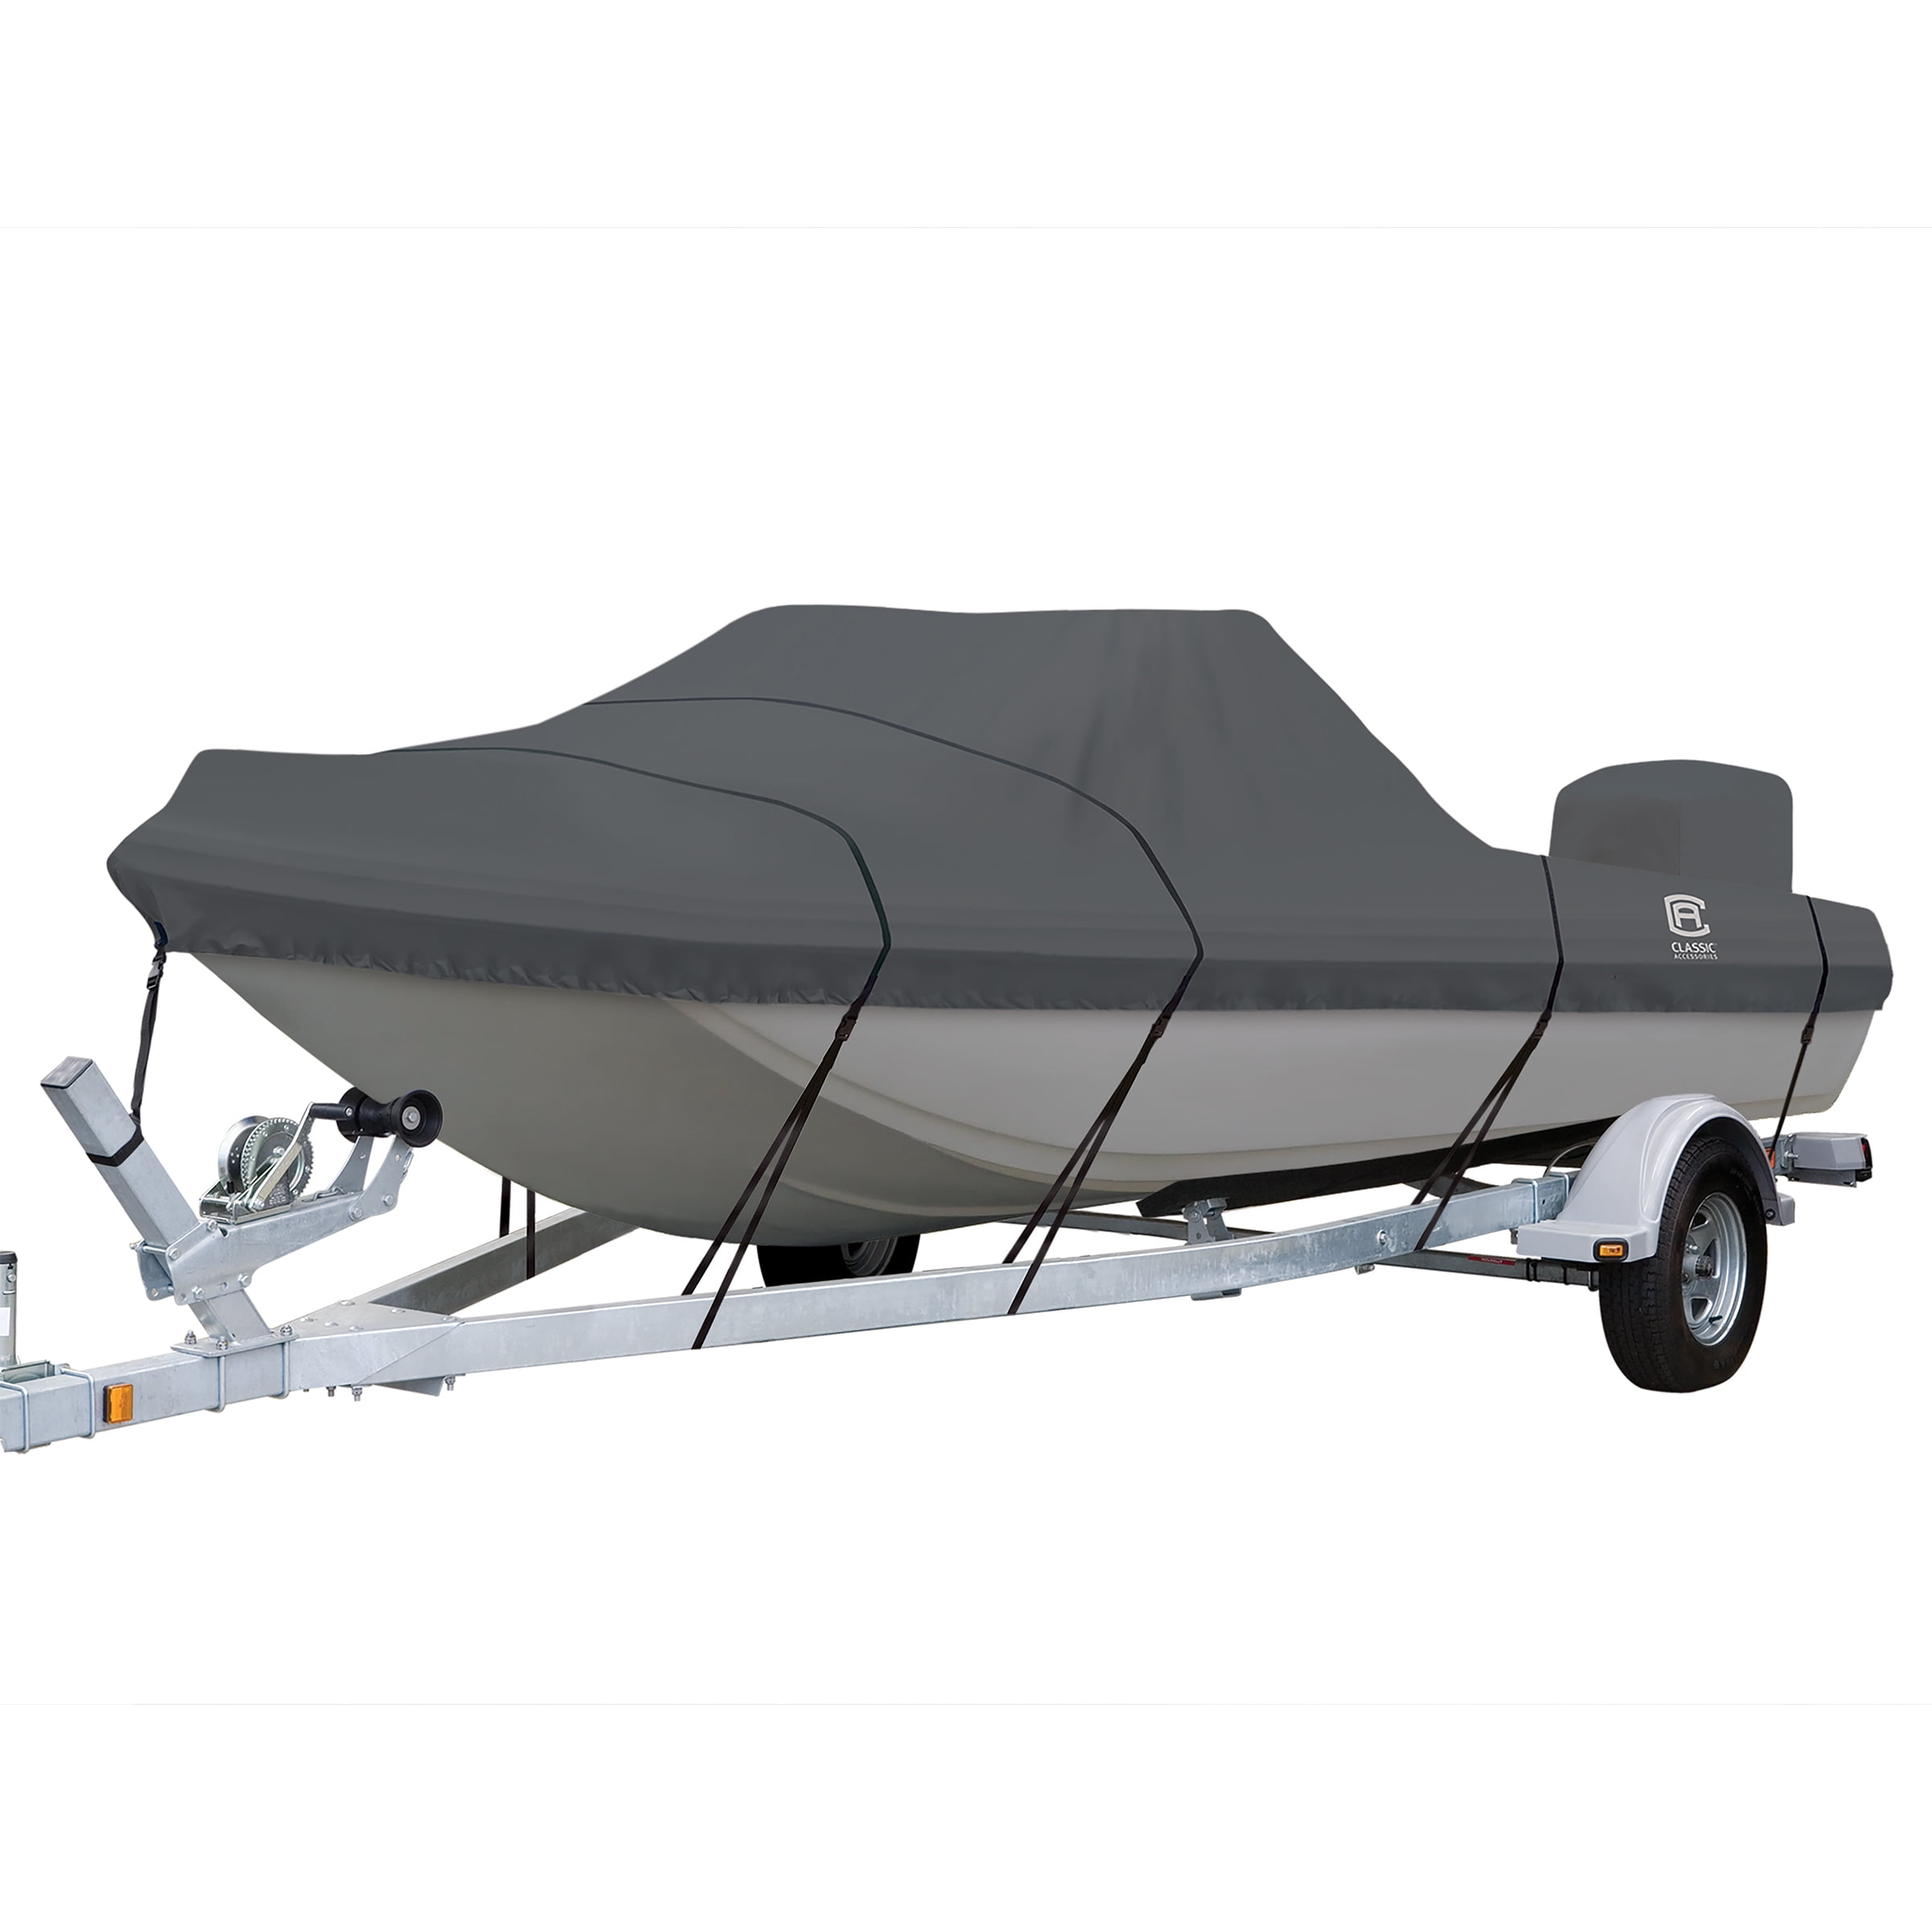 Classic Accessories StormPro Heavy-Duty Tri-Hull Outboard Boat Cover, Fits Boats 15 ft 6 in - 16 ft 6 in Long x 86 in Wide